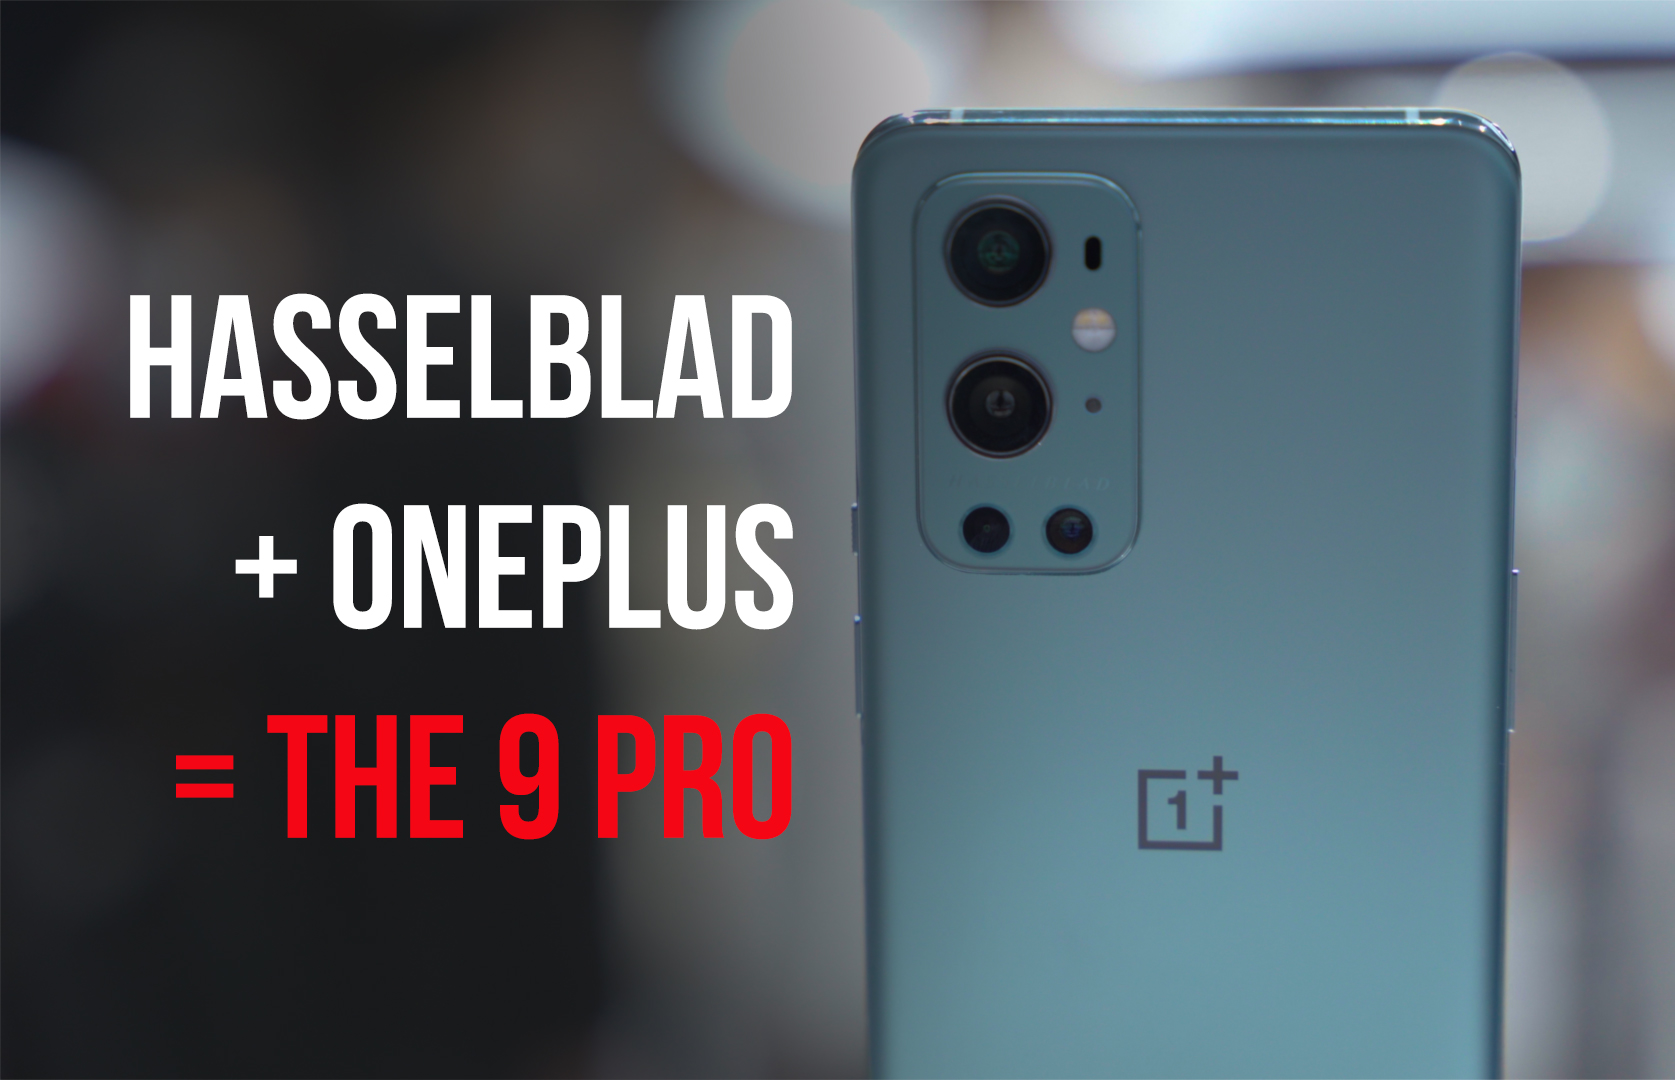 OnePlus 9 Pro Launch Event (With Hasselblad)